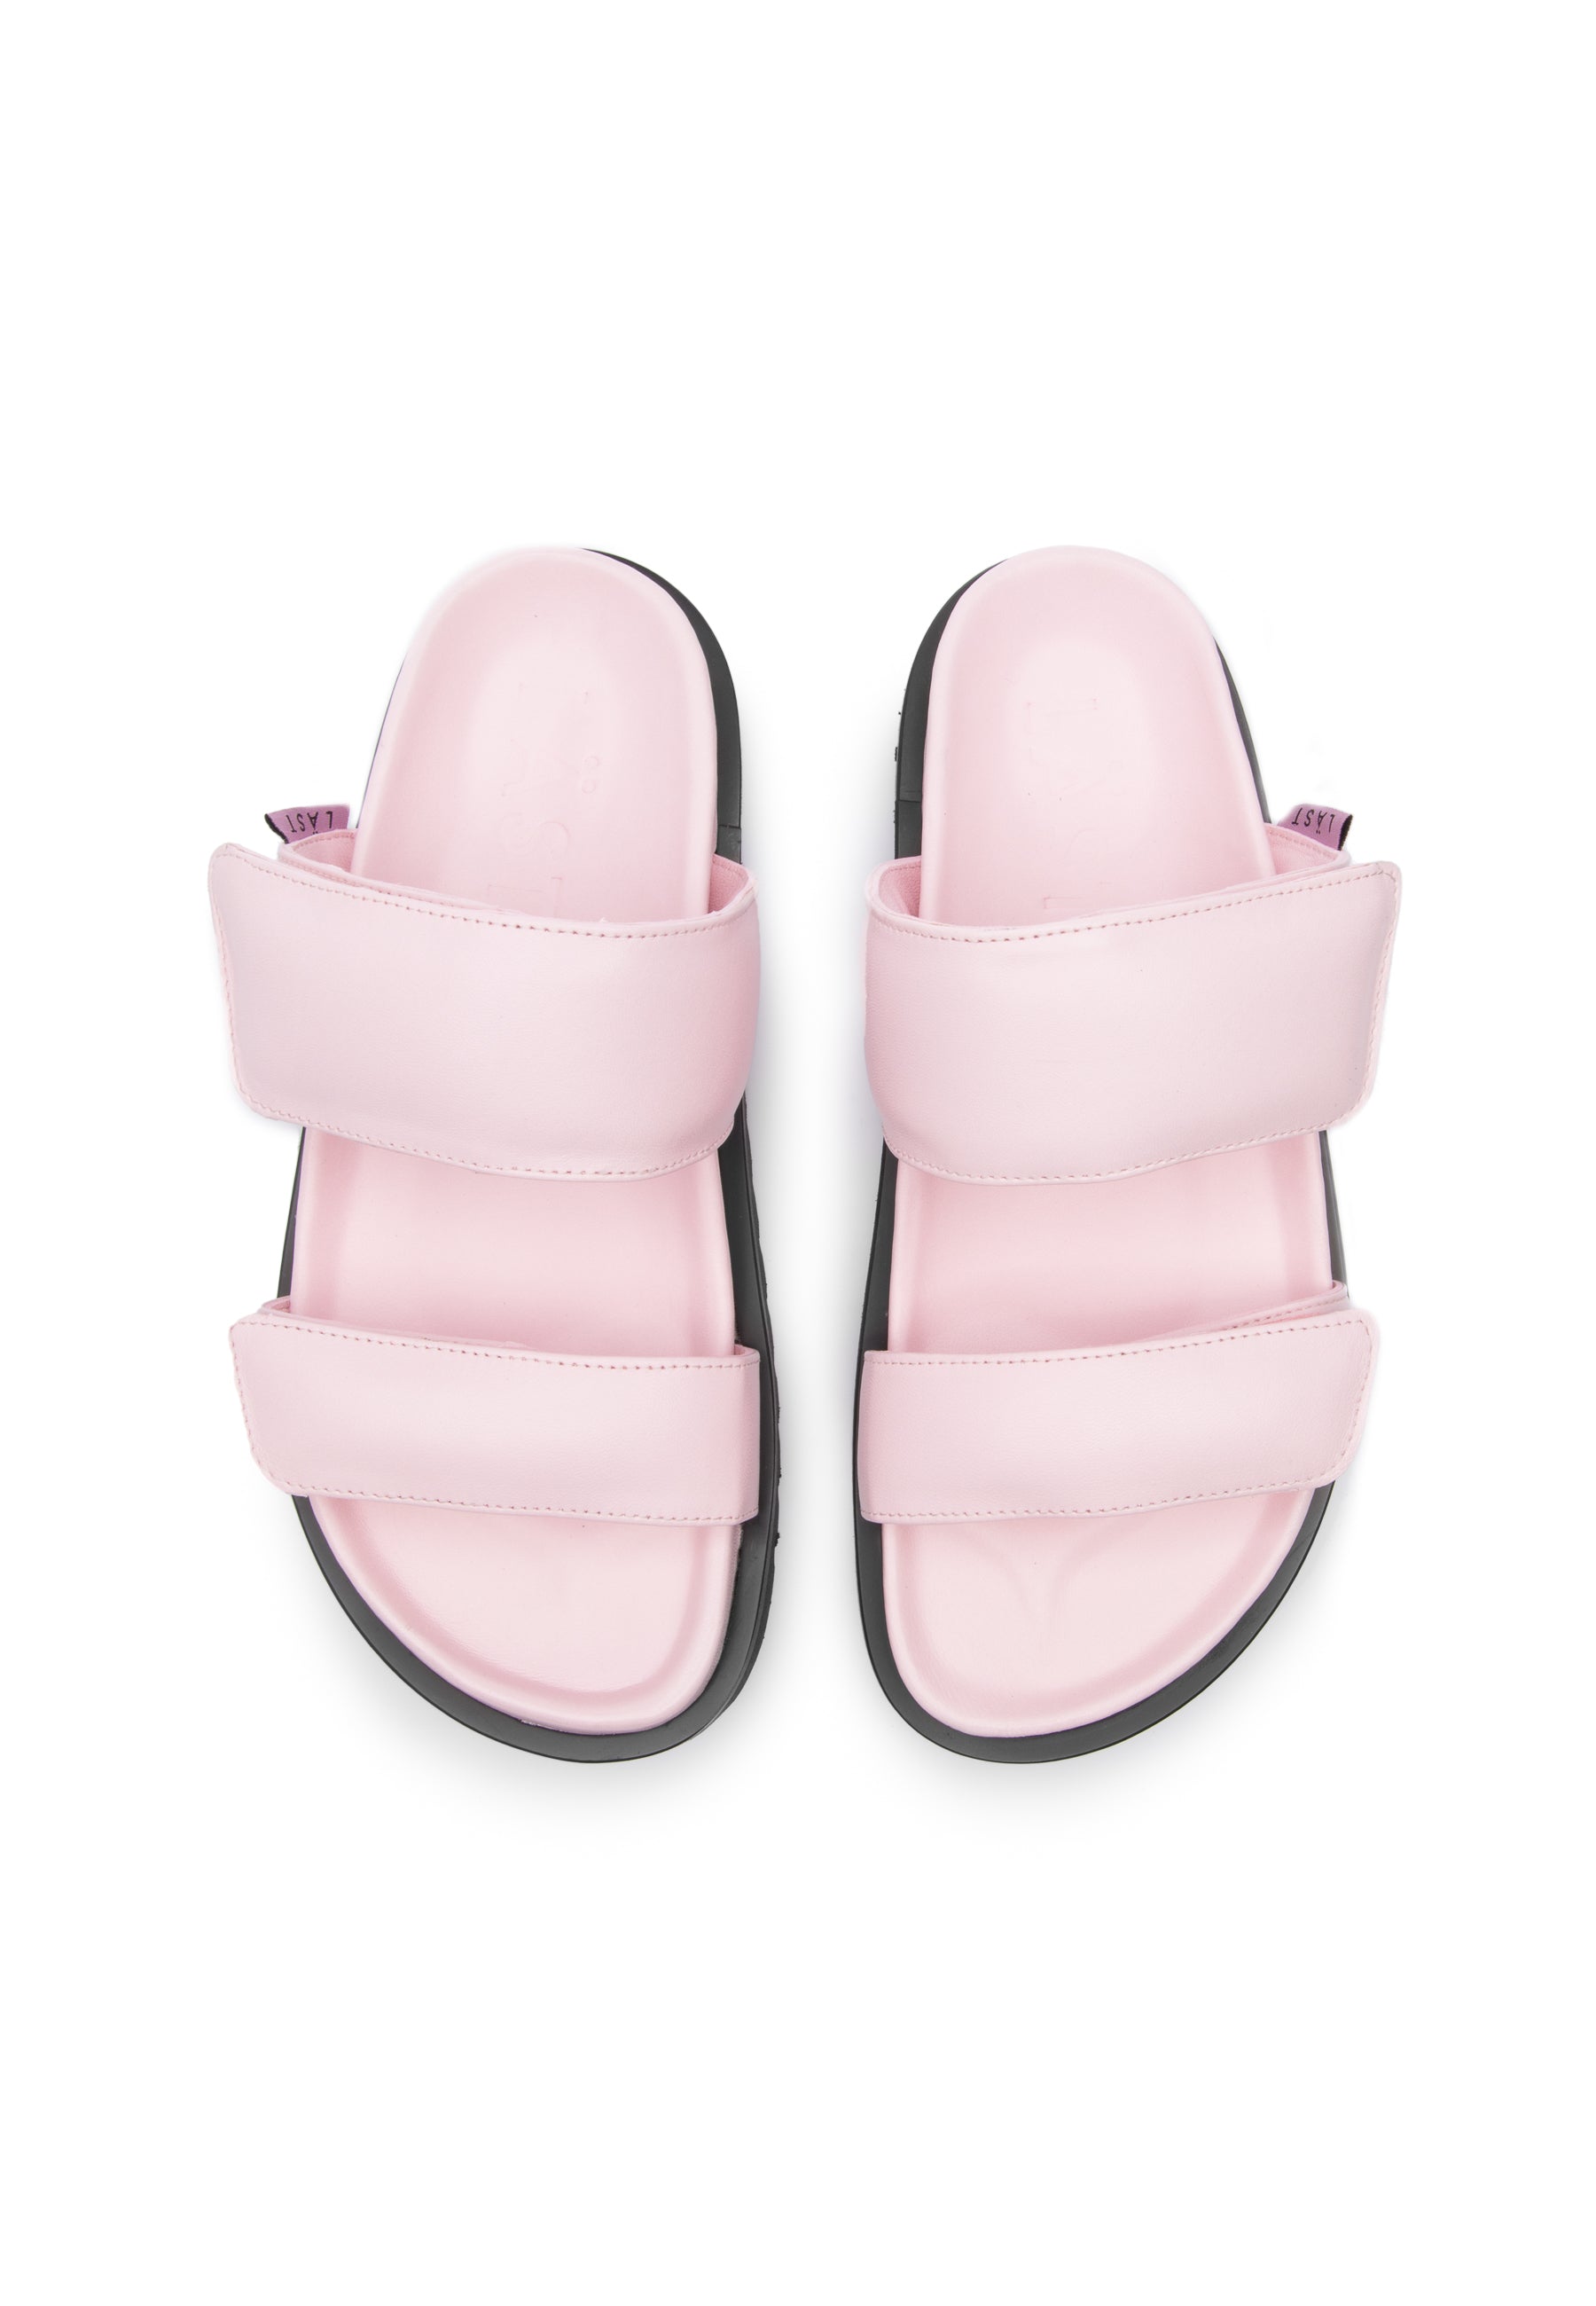 Corine Pink Leather Puffy Sandals LAST1515 - 4